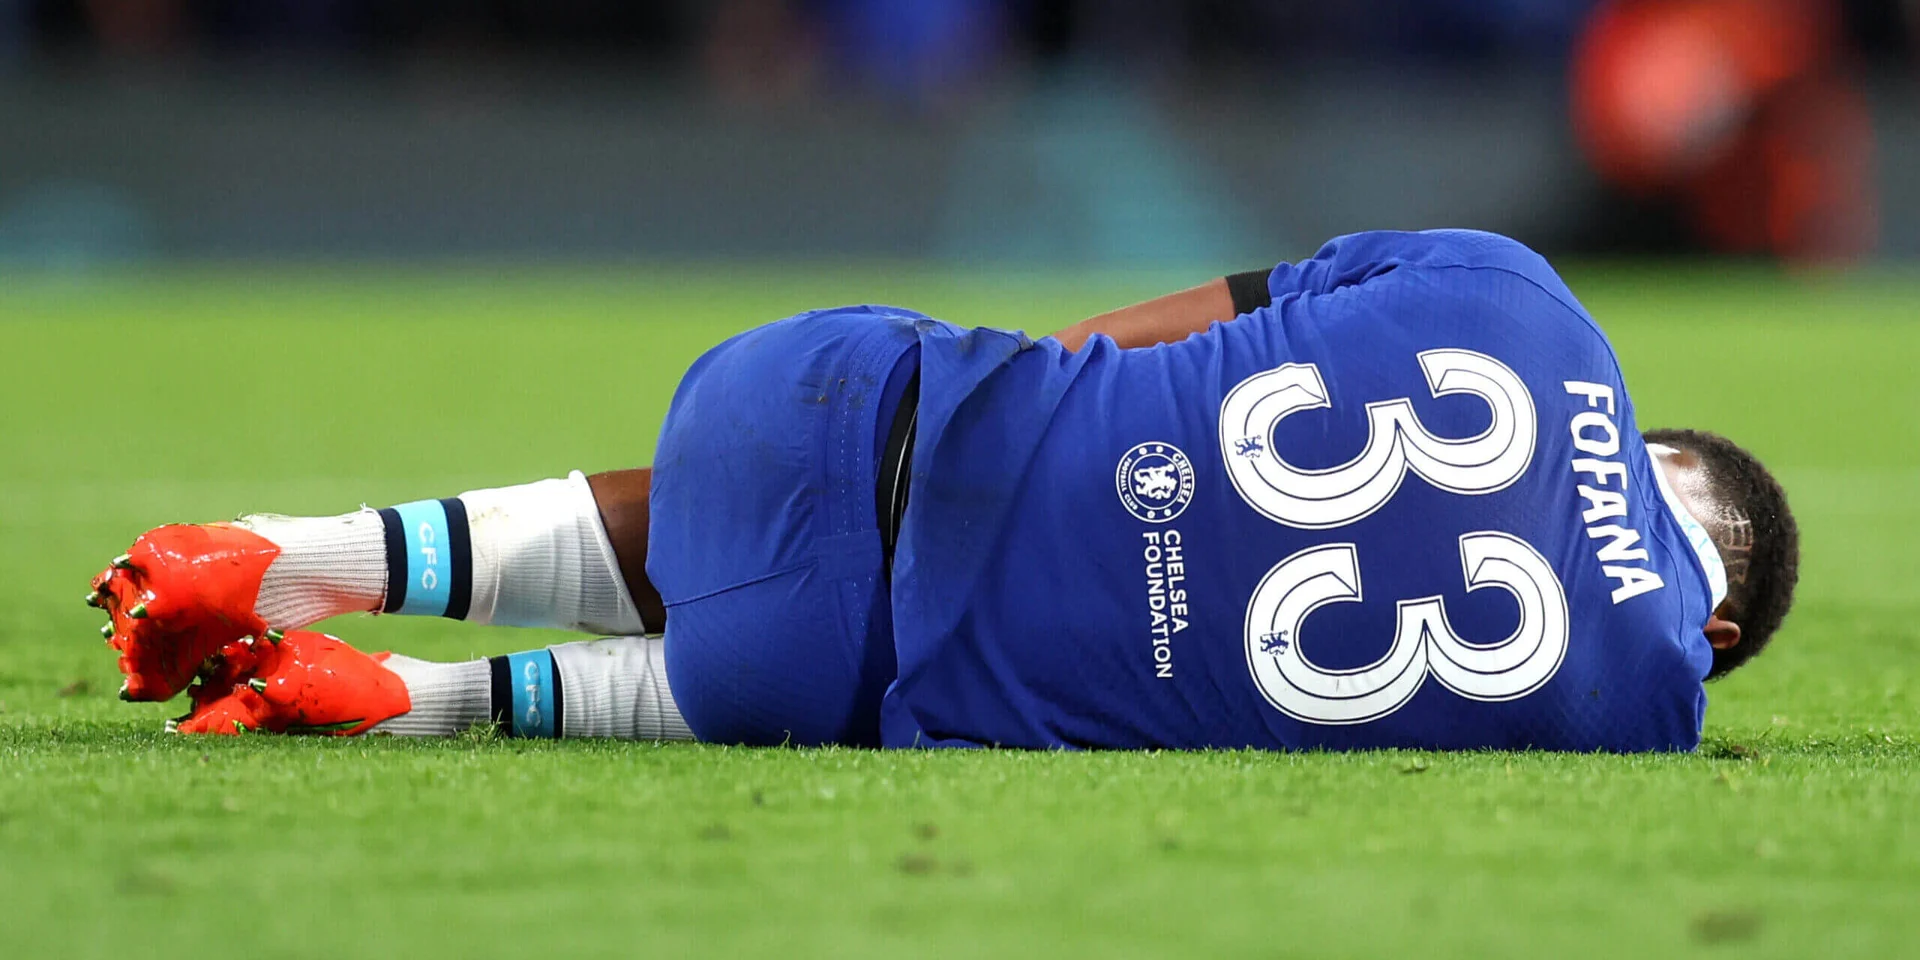  Chelsea Lost the Most Days, Manchester City the Least. The Premier League is known for its physicality and demanding schedule, which often affects players'